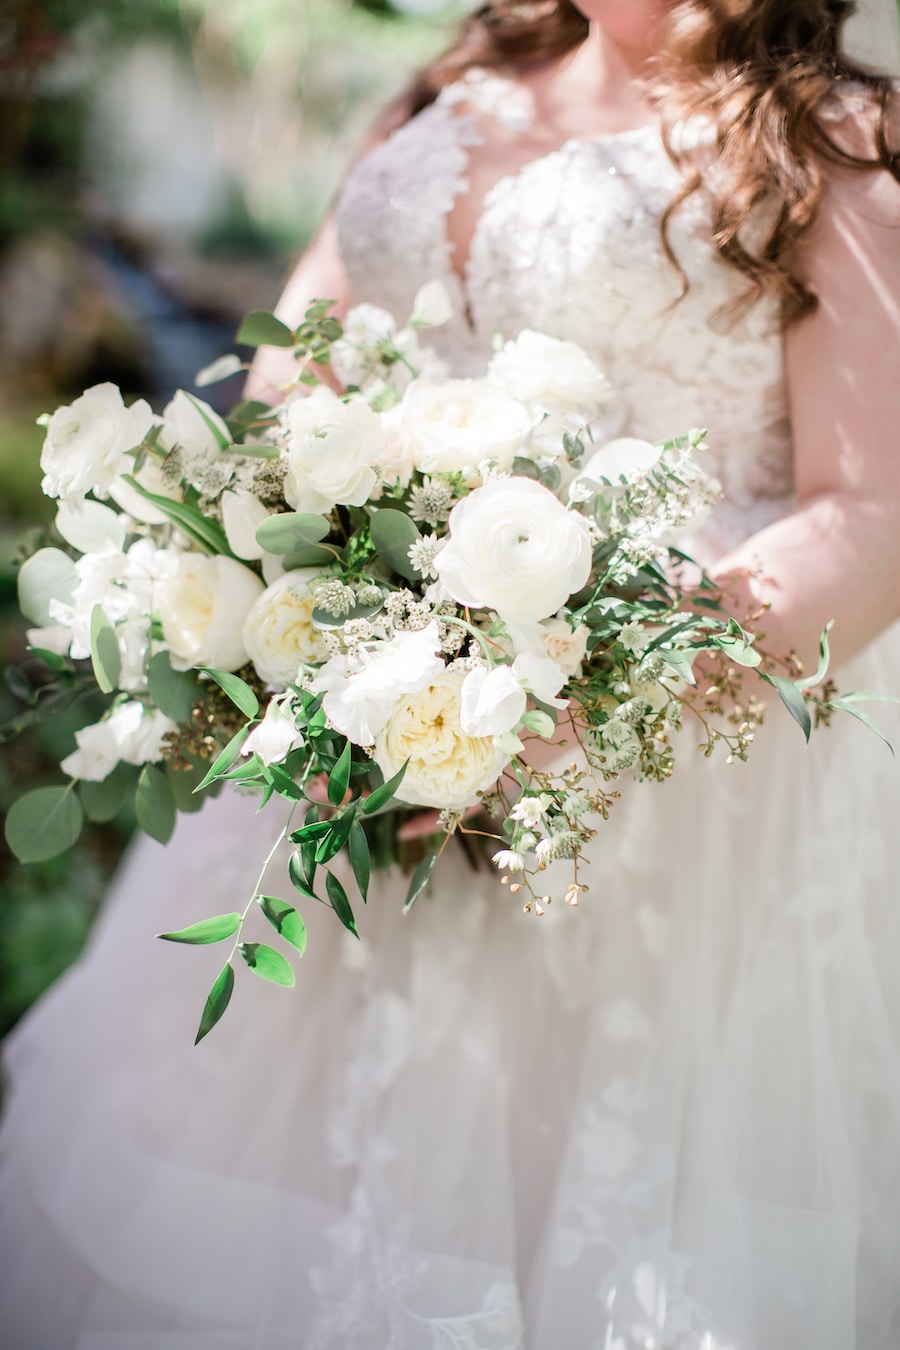 Simple Garden Wedding Inspiration with Neutral Colors of White, Ivory, Sand and Champagne